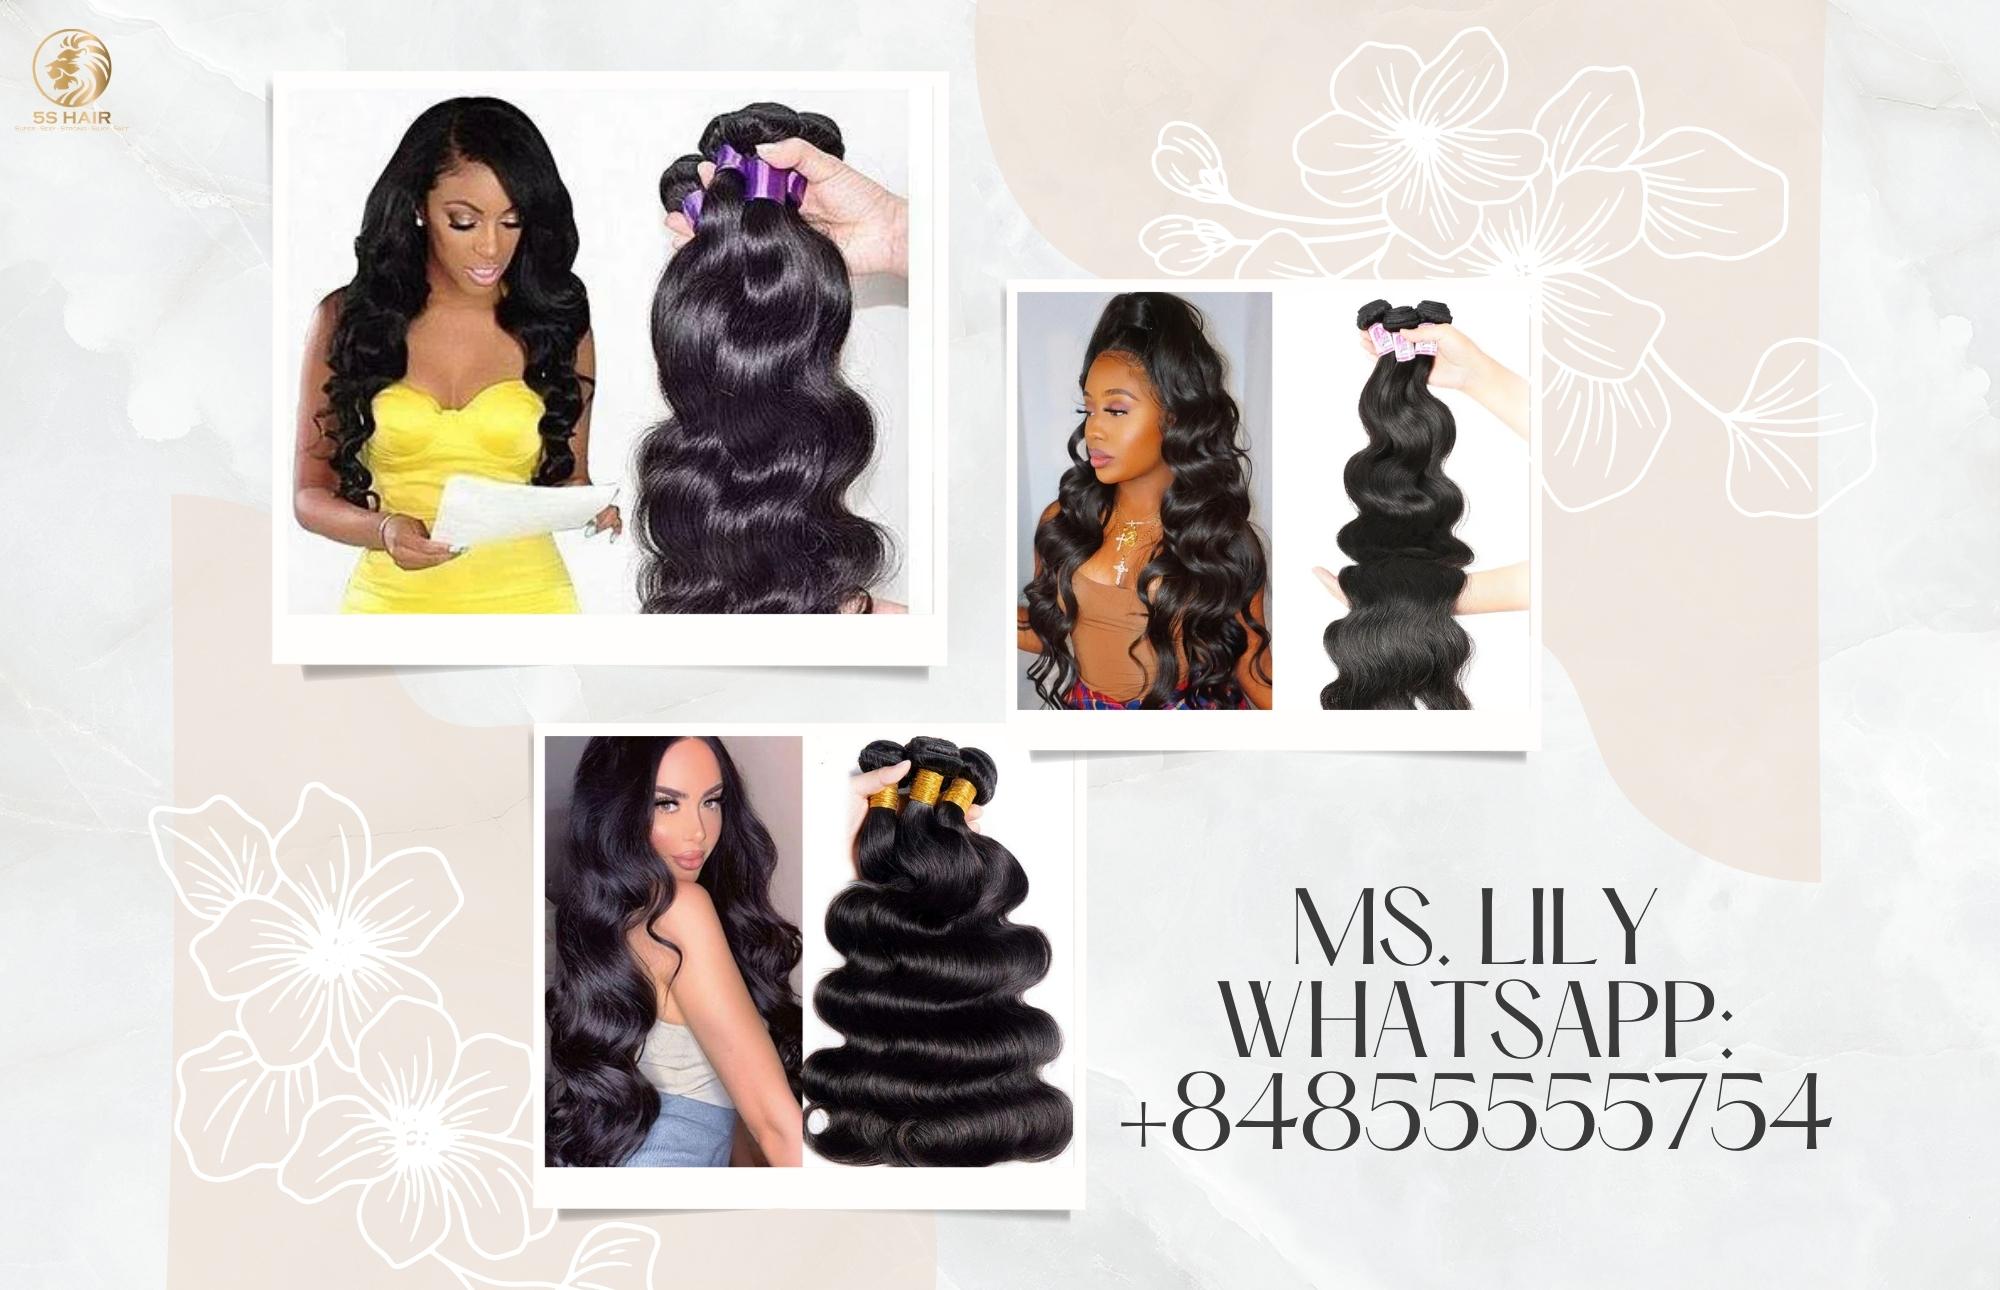 start-a-human-hair-extensions-wholesale-business-if-you-want-to-get-wealthy-2